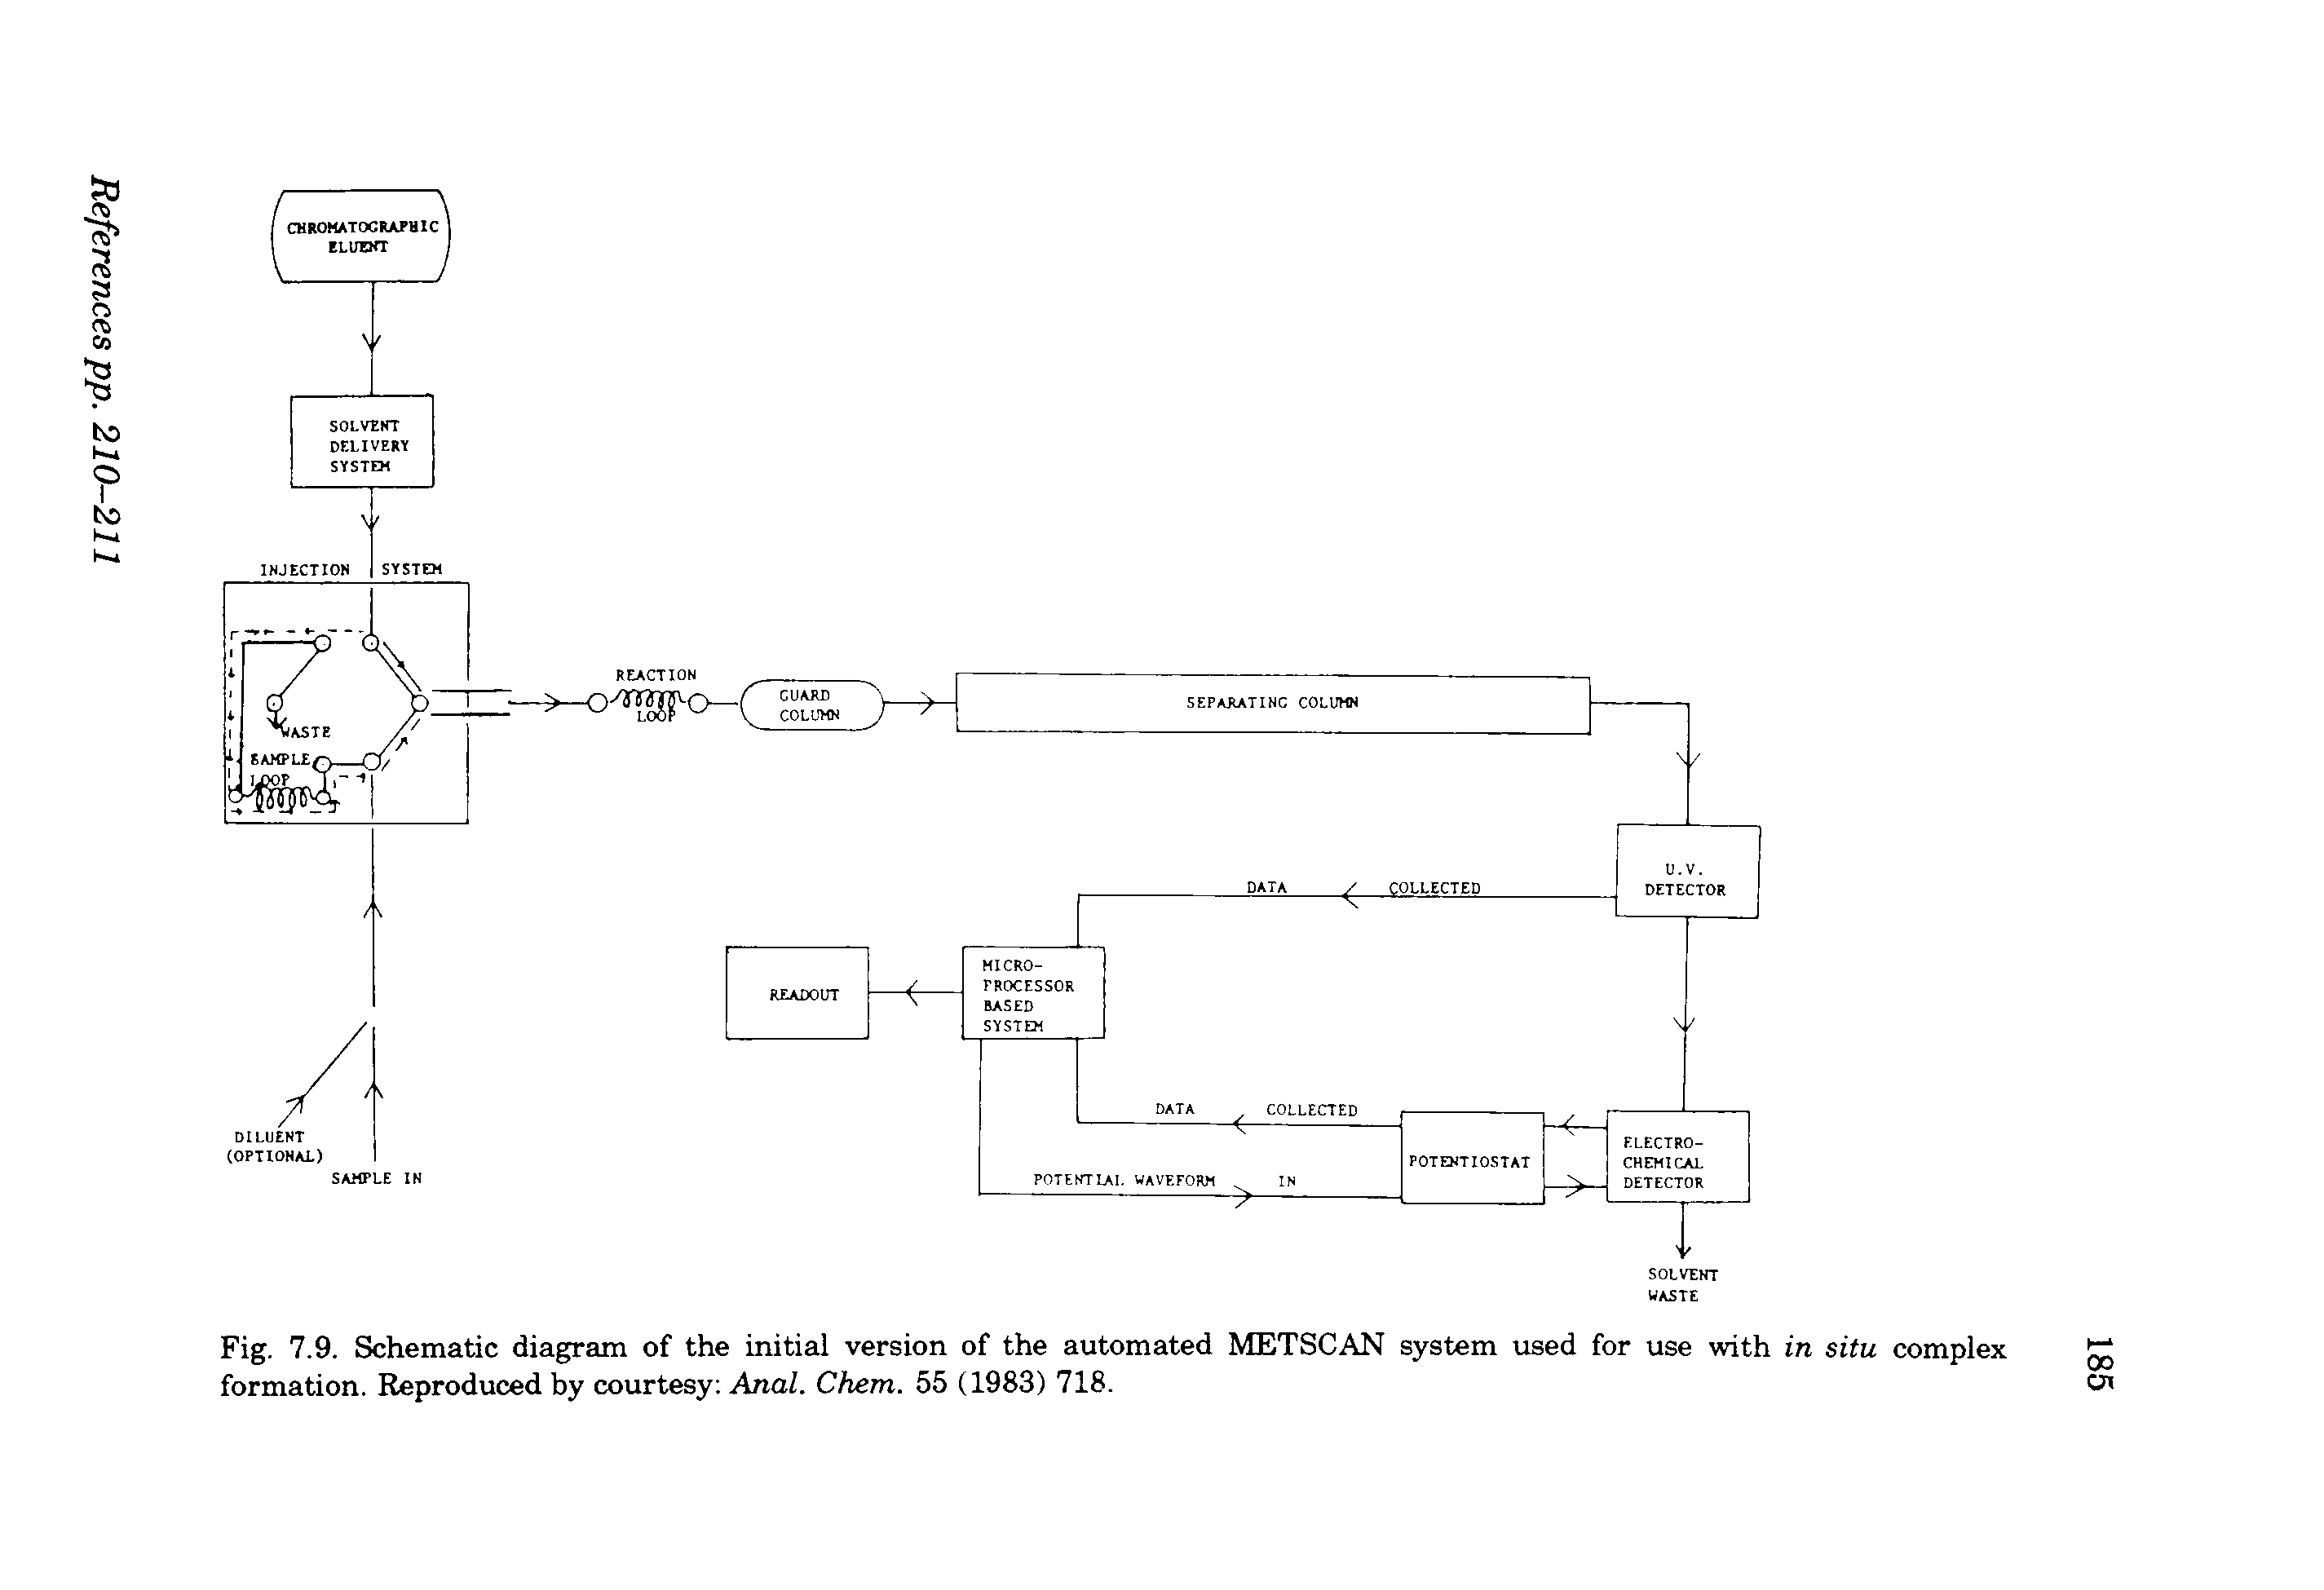 Fig. 7.9. Schematic diagram of the initial version of the automated METSCAN system used for use with in situ complex formation. Reproduced by courtesy Anal. Chem. 55 (1983) 718.